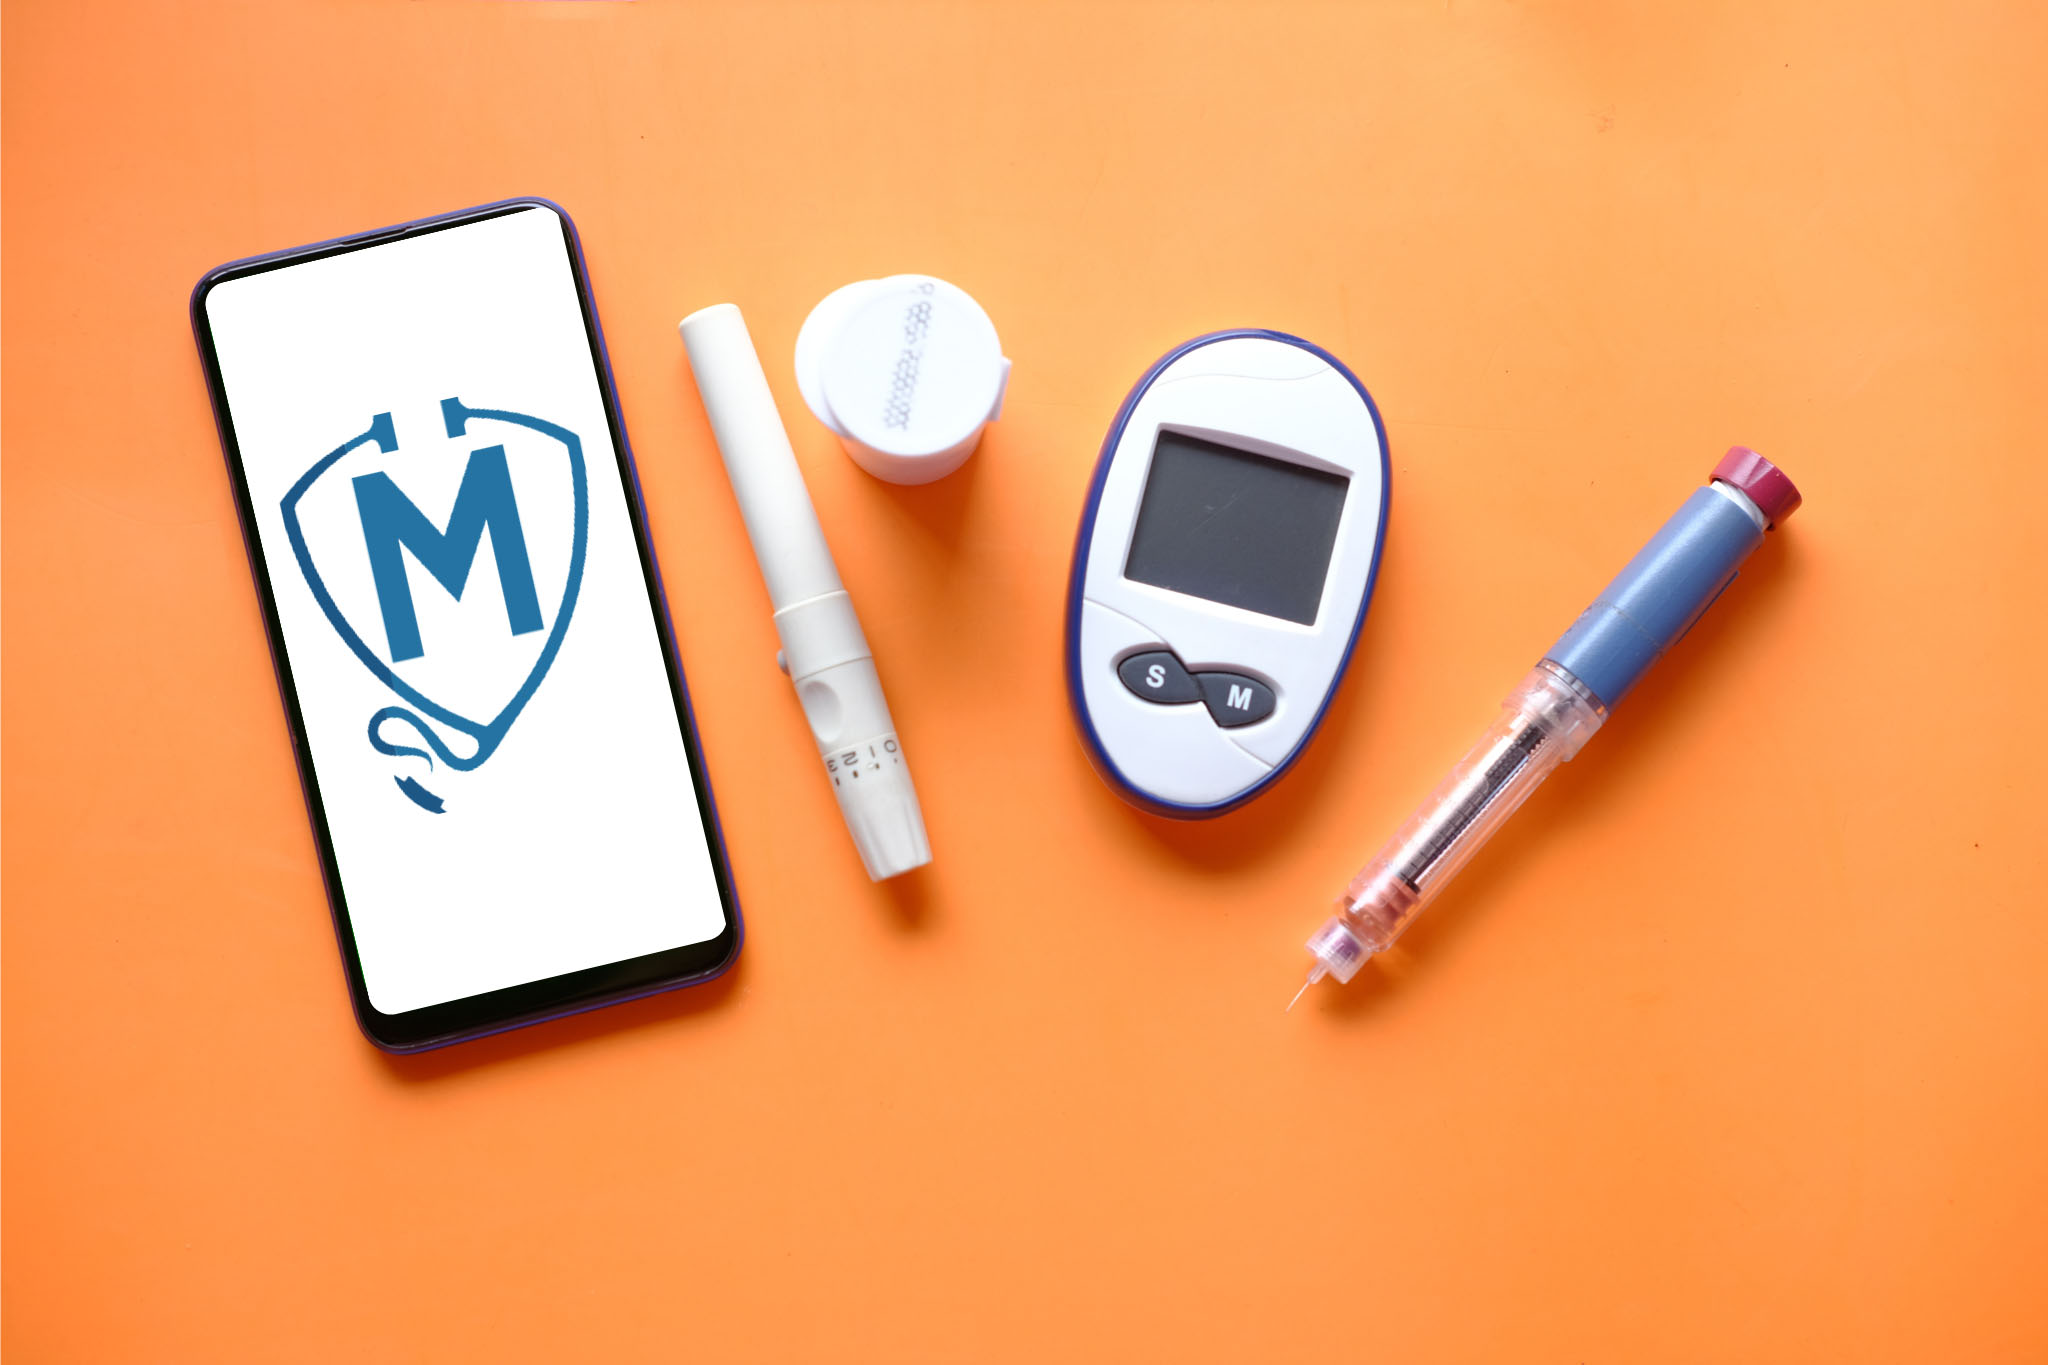 CGM vs Traditional Glucose Monitors: Which ones are better?